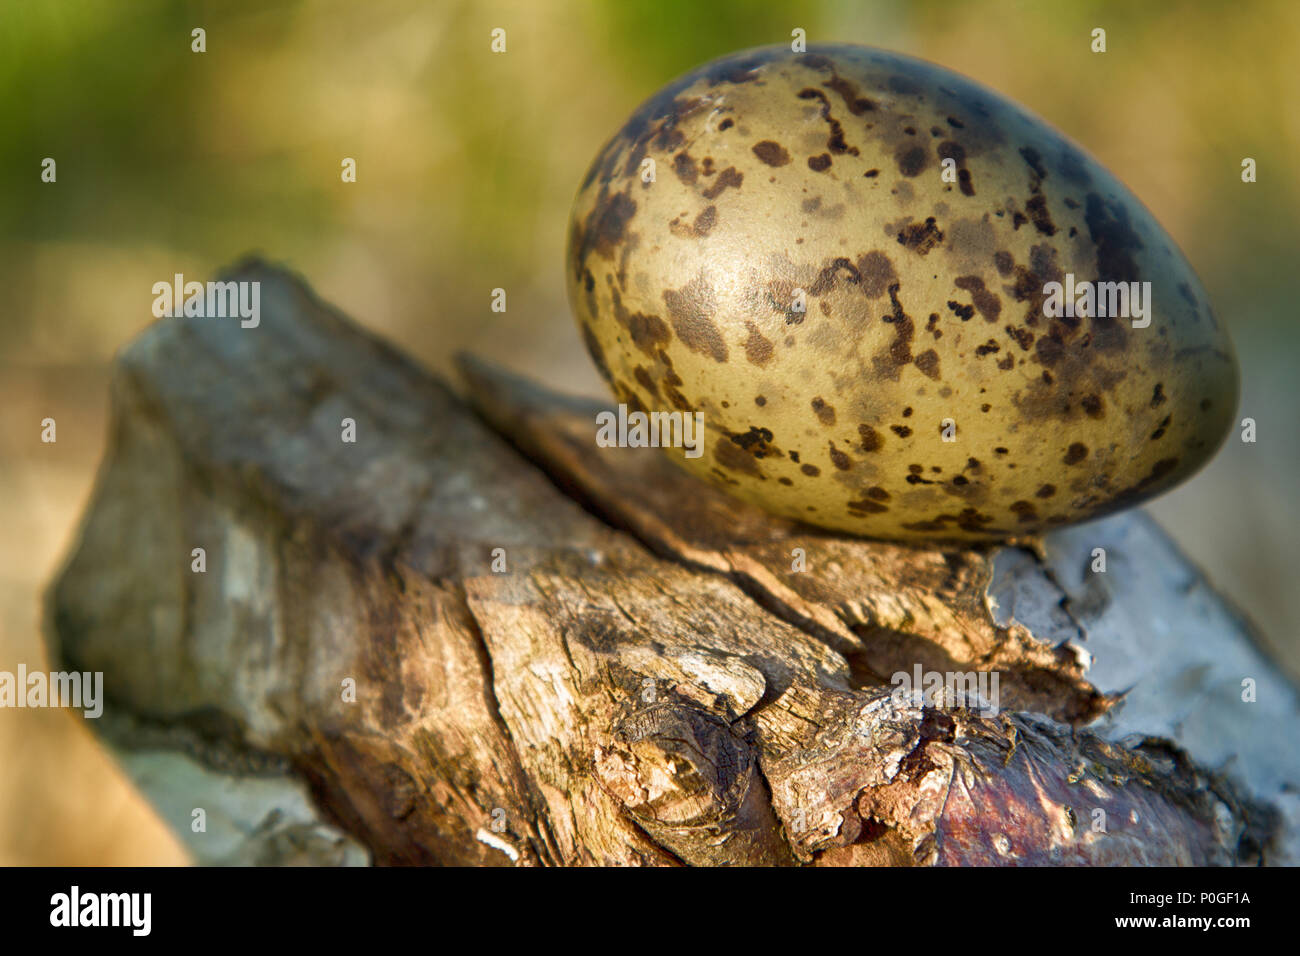 mottled olive color egg (egg of gull) on cut of tree that was gnawed by beaver. Designer arrangement of cut wood and eggs Stock Photo